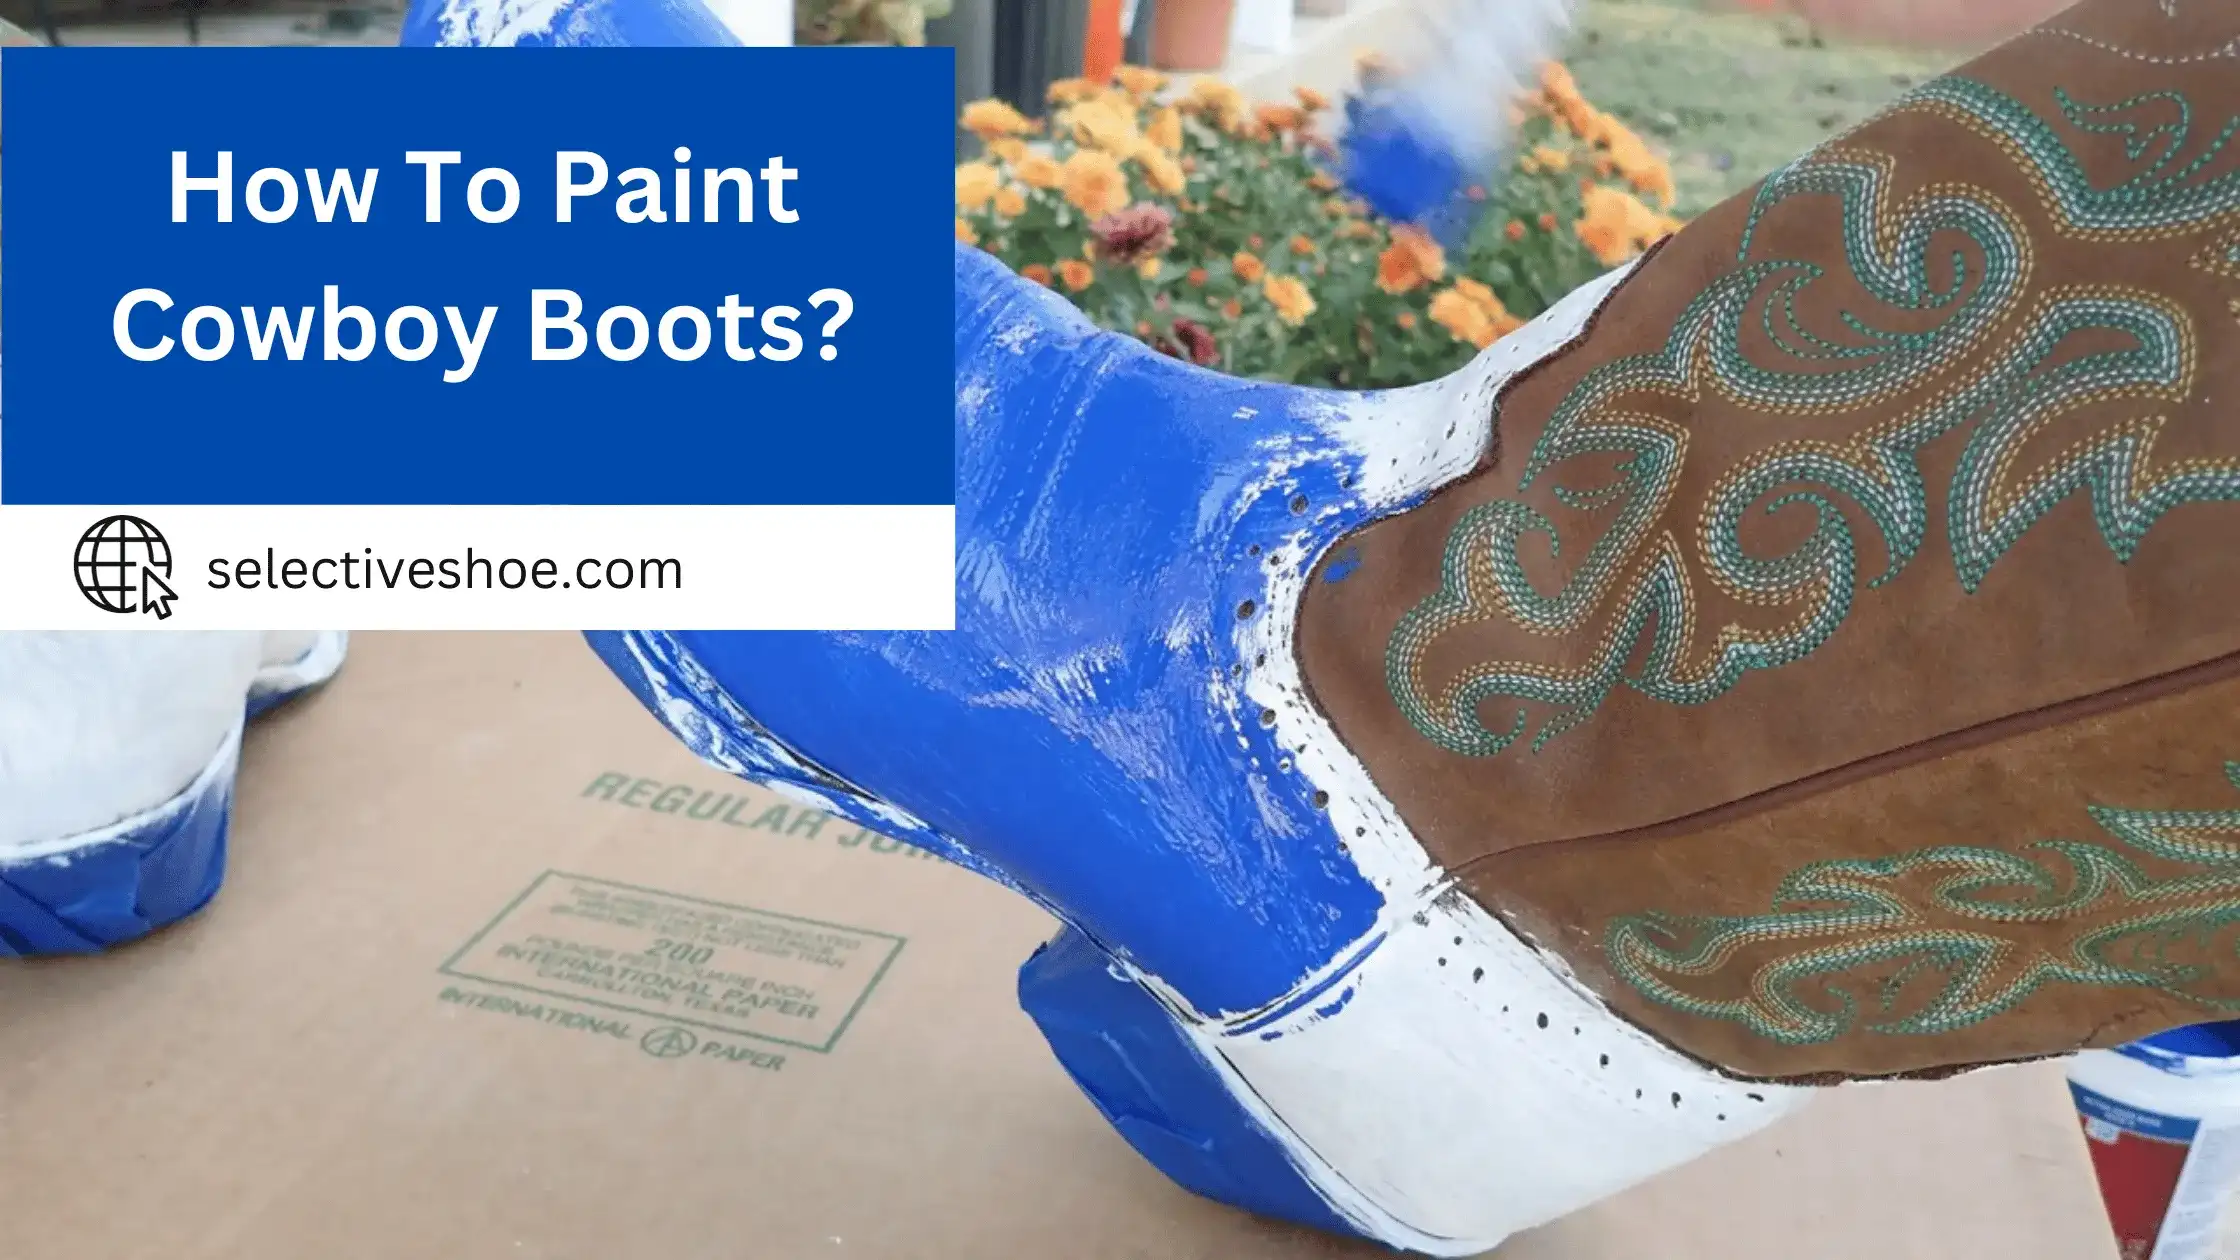 How To Paint Cowboy Boots? Quick Solutions!